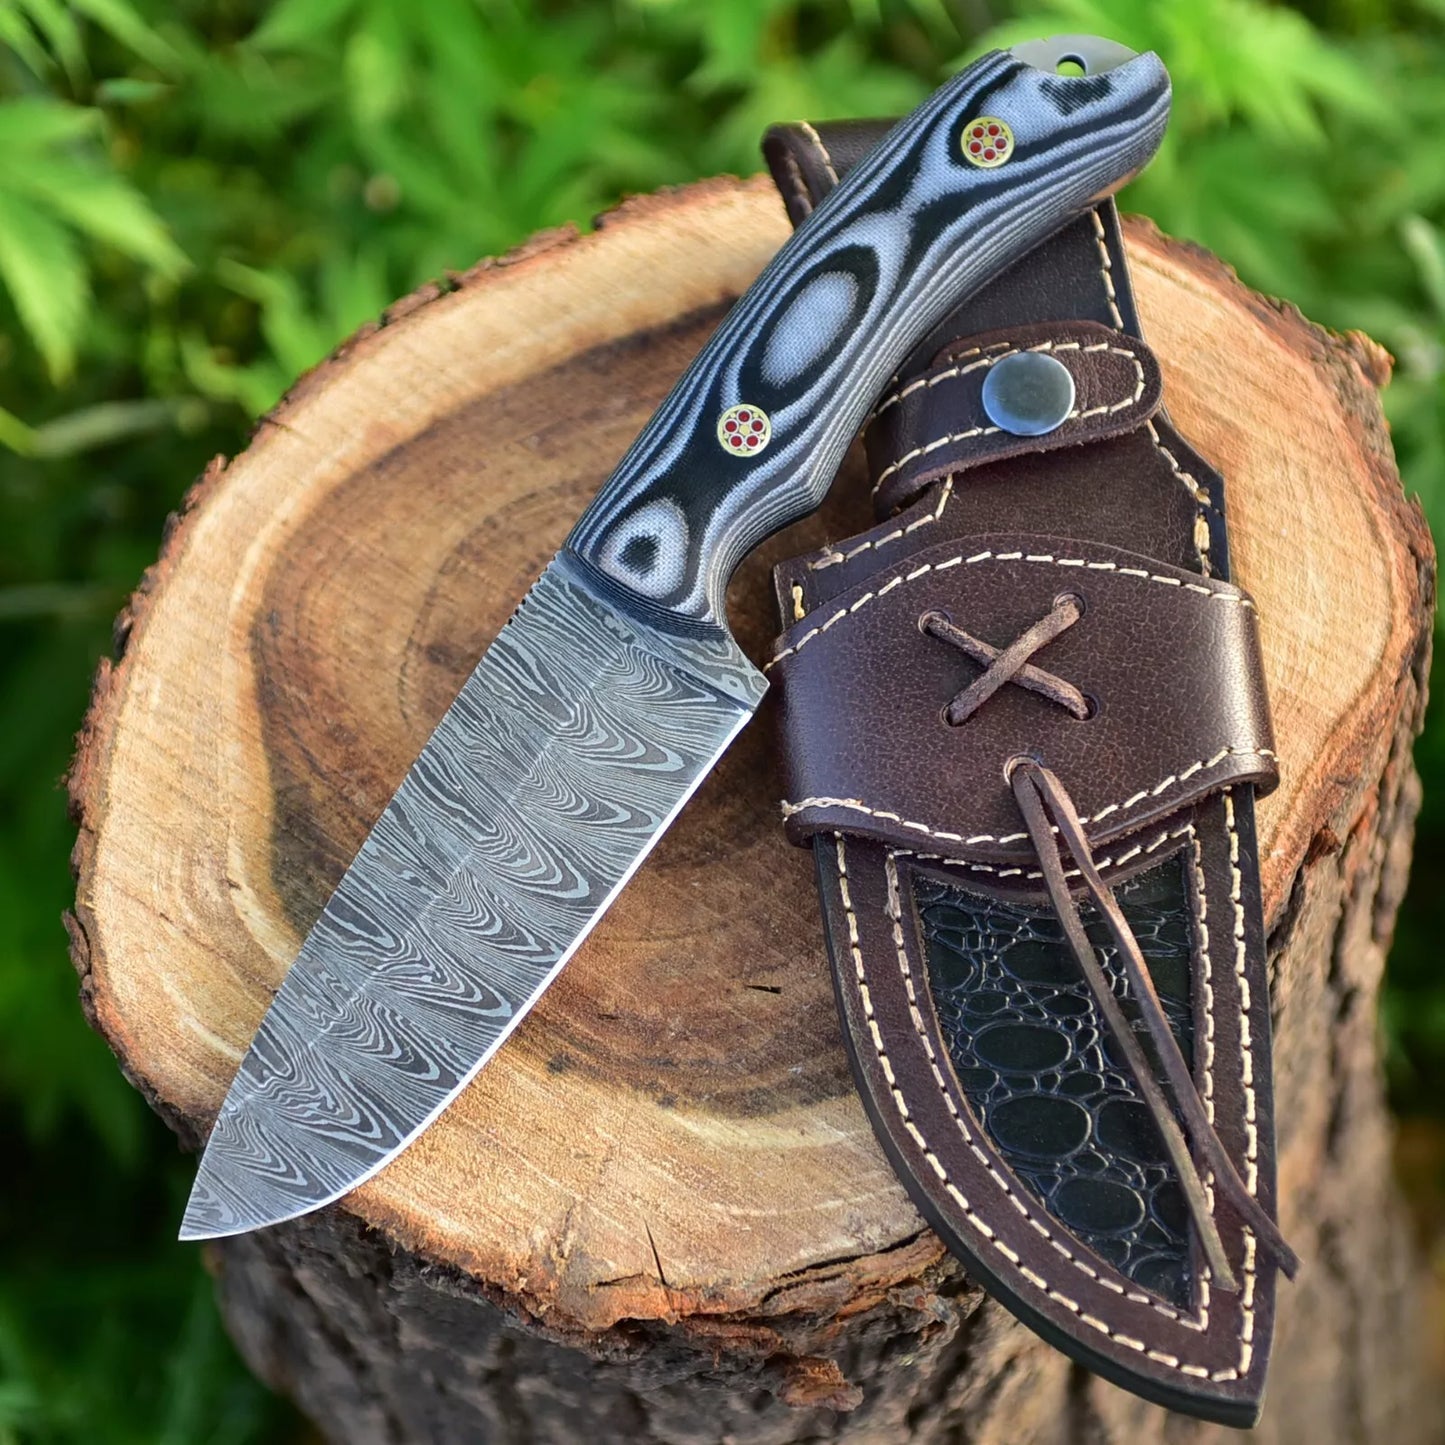 HUNTING KNIVES - Custom Handmade Damascus Steel Hunting Knife Fixed Blade With Leather Sheath